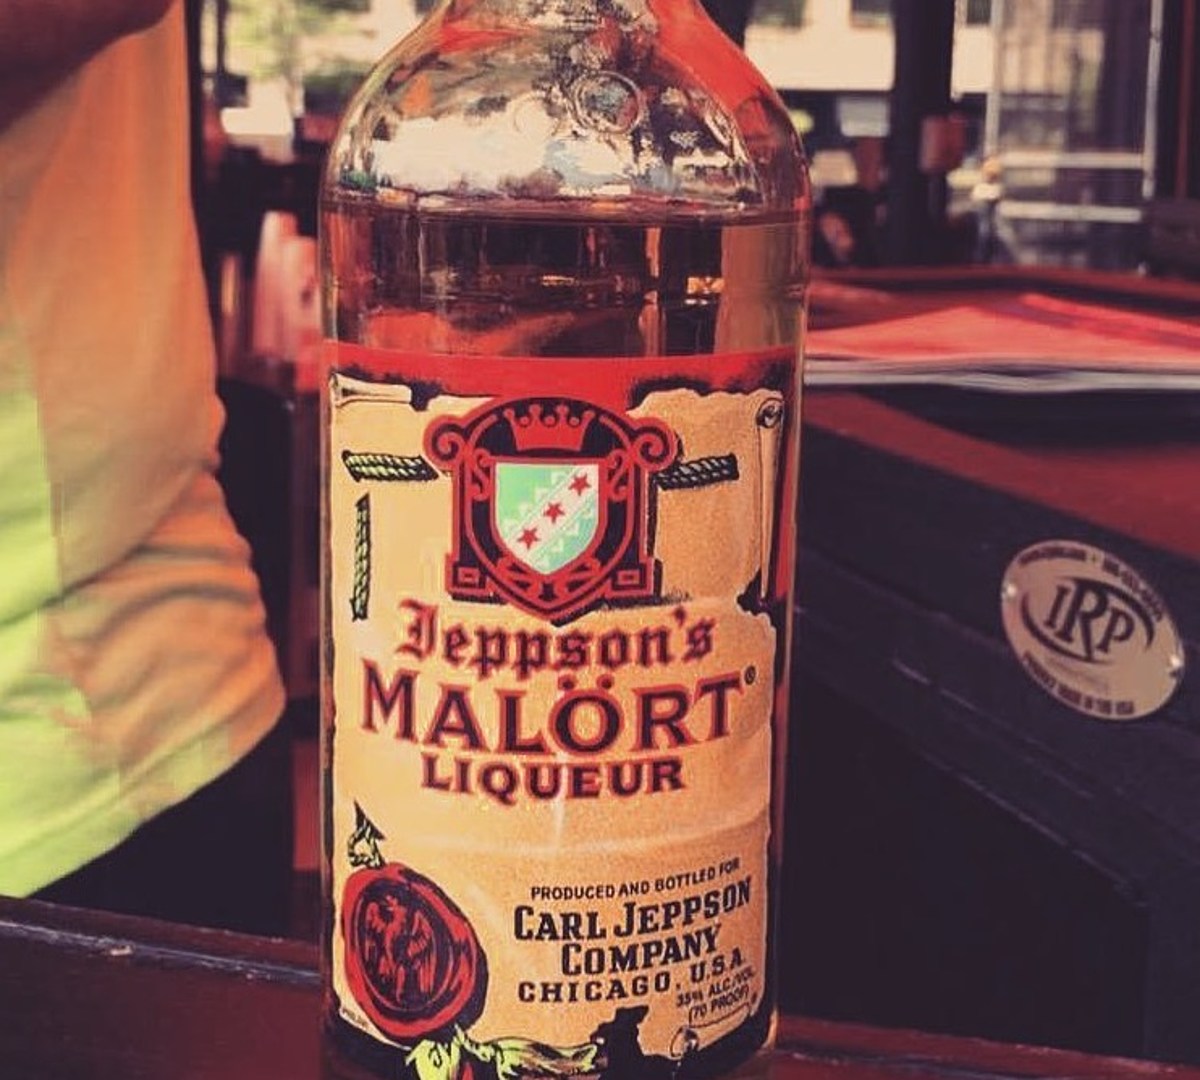 How Jeppson's Malort became Chicago's drink - Chicago Sun-Times